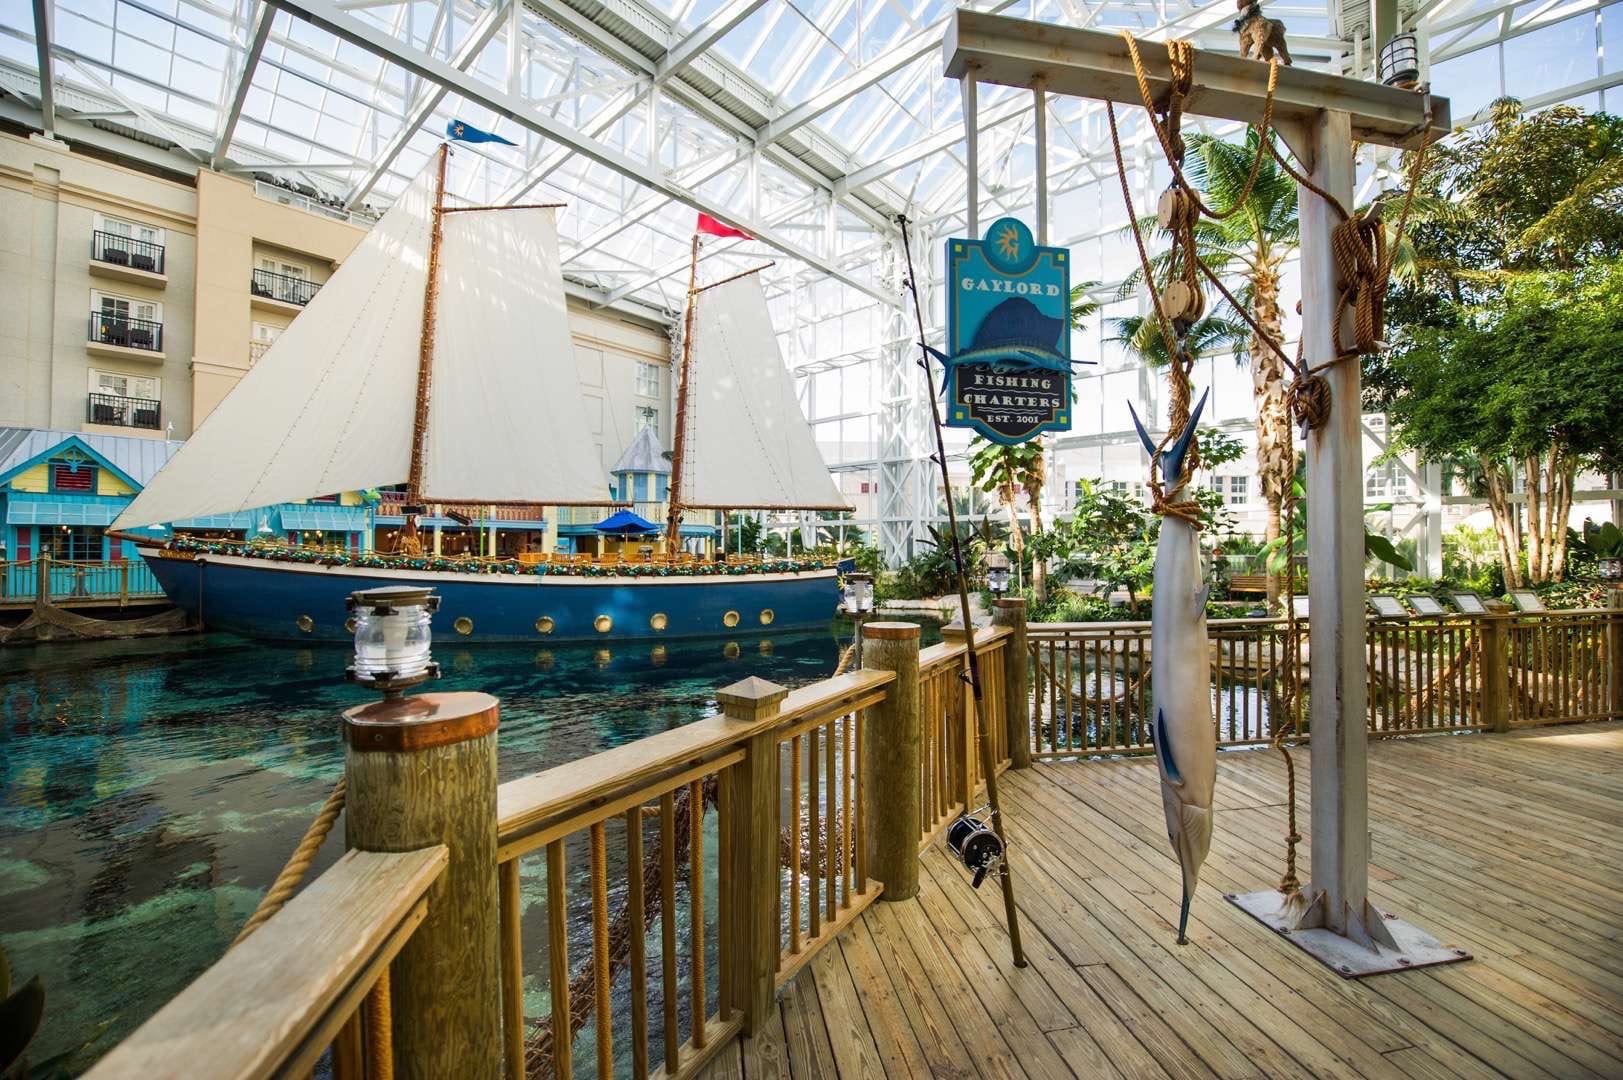 IU C&I Studios Portfolio Gaylord Palms Resort and Convention Center Interior showing a marine themed area with a small ship, fishing rod and replica of hanging marlin fish.